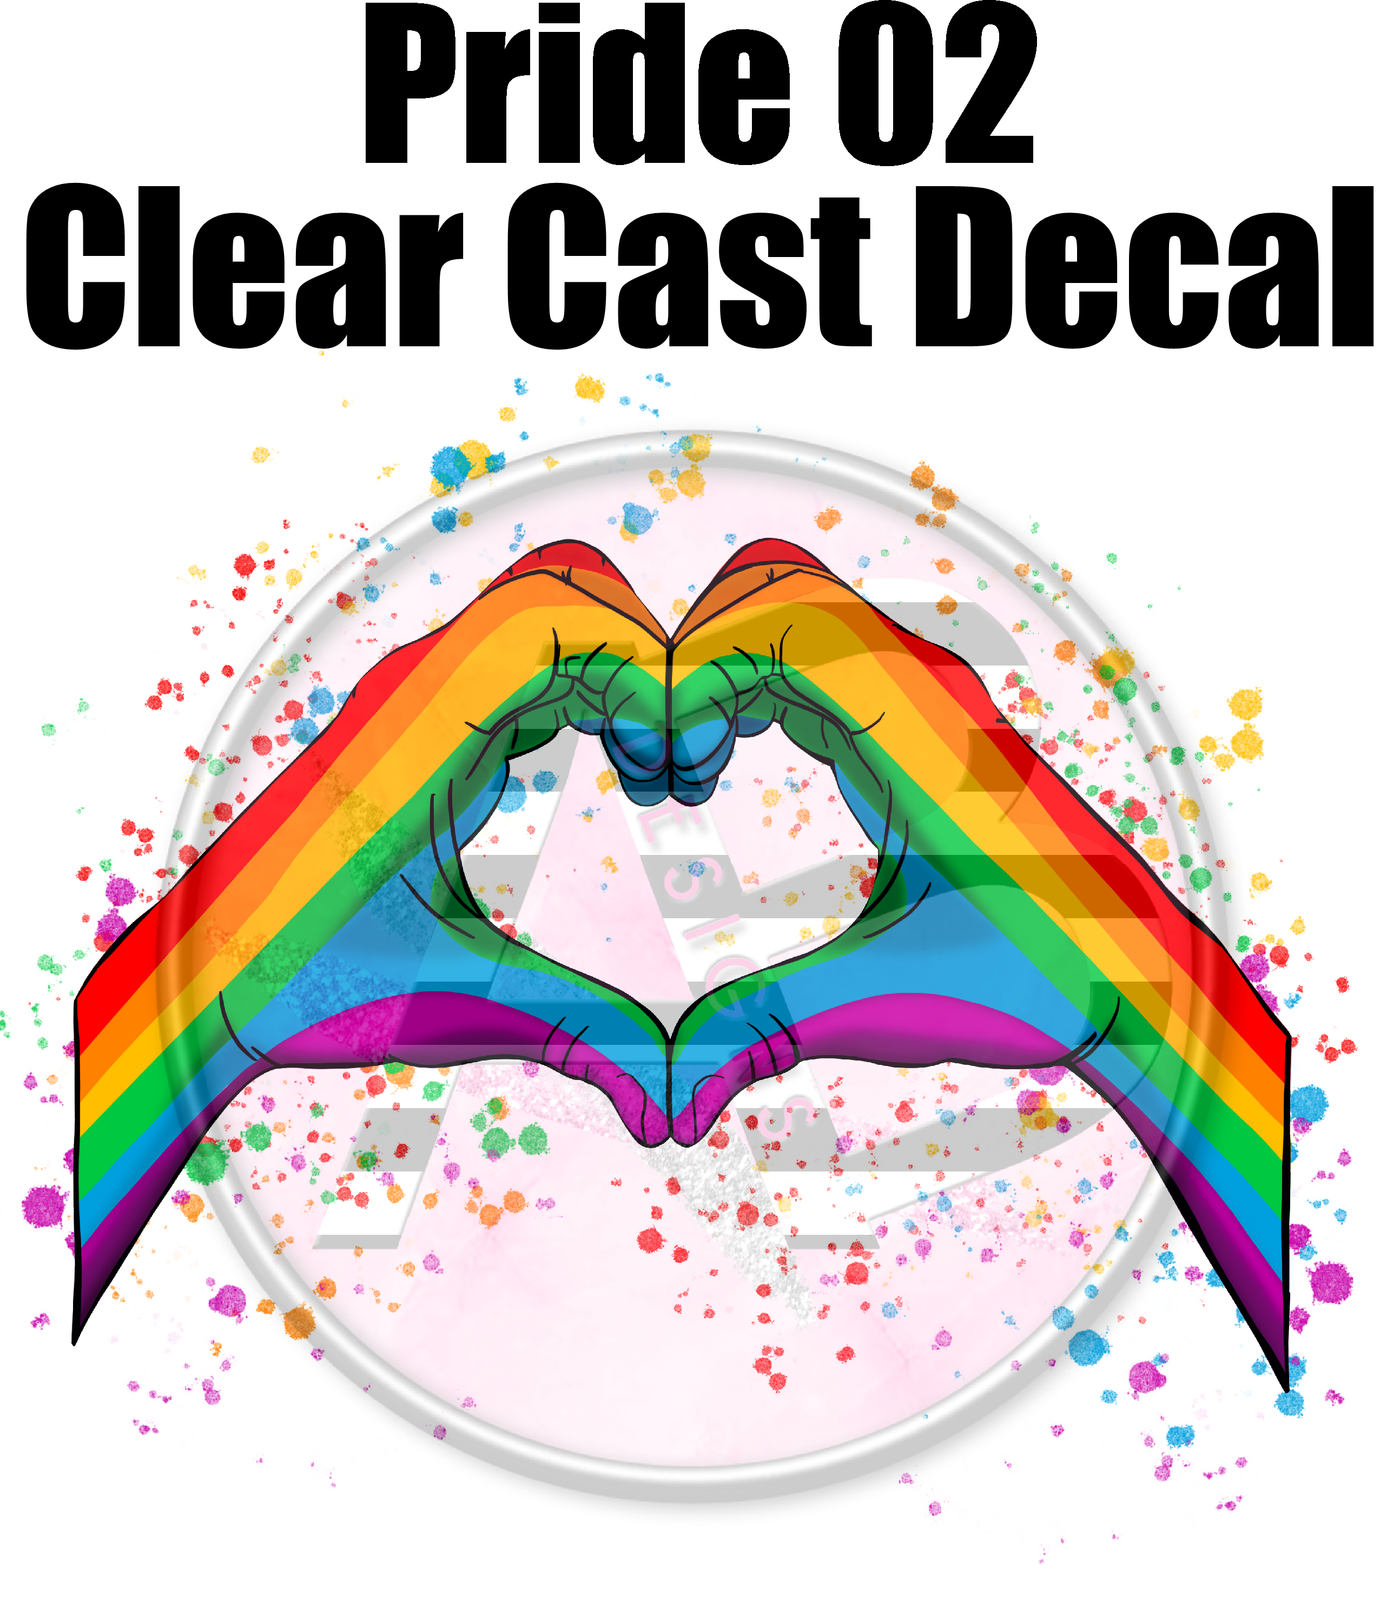 Pride 02 - Clear Cast Decal